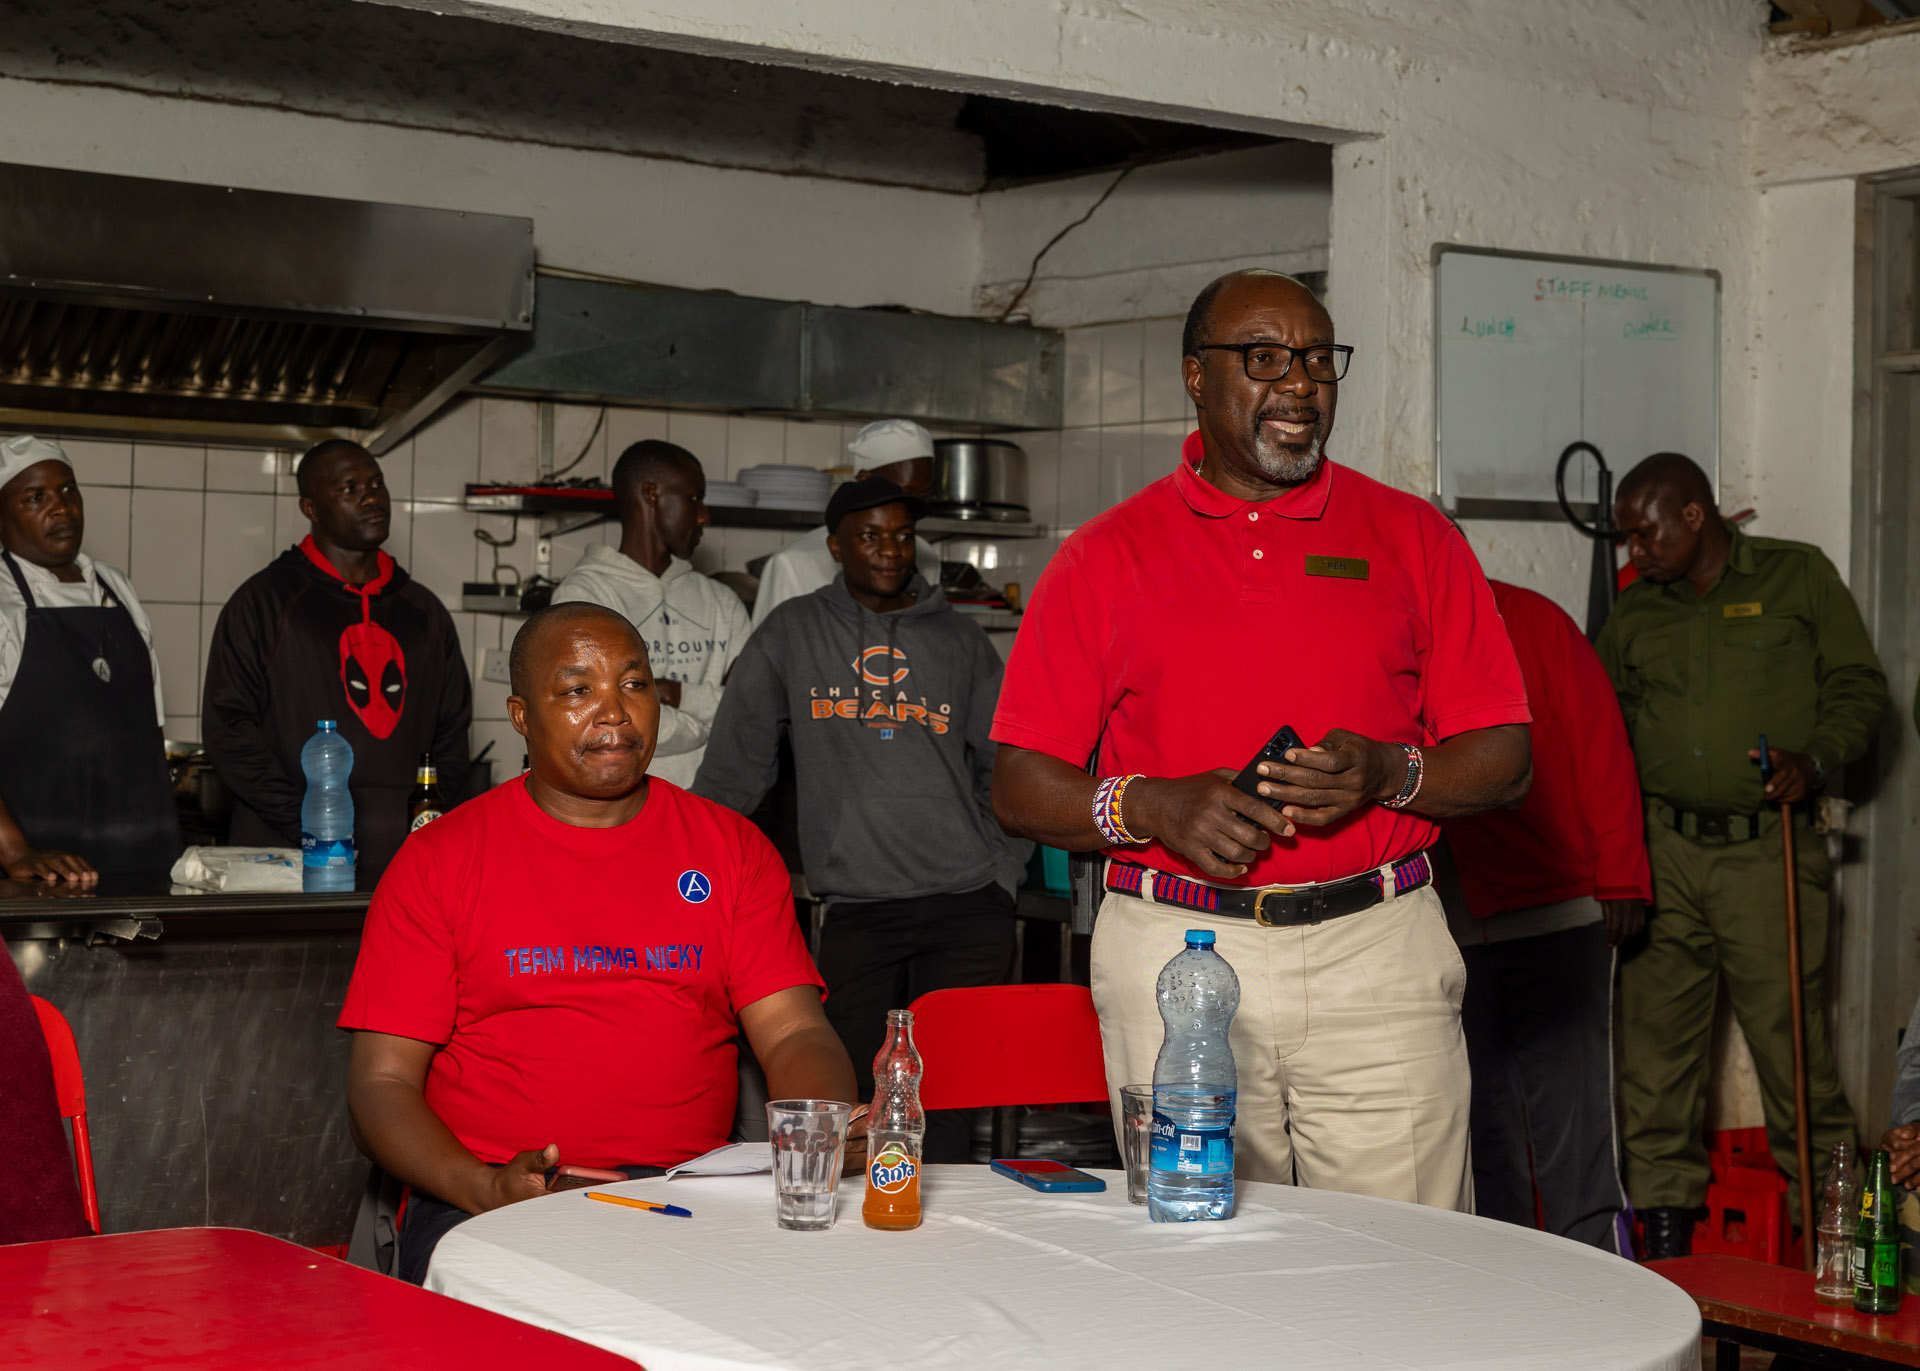 Ken Mambo, Angama Mara's General Manager, gives a speech with Chef Evans at his side